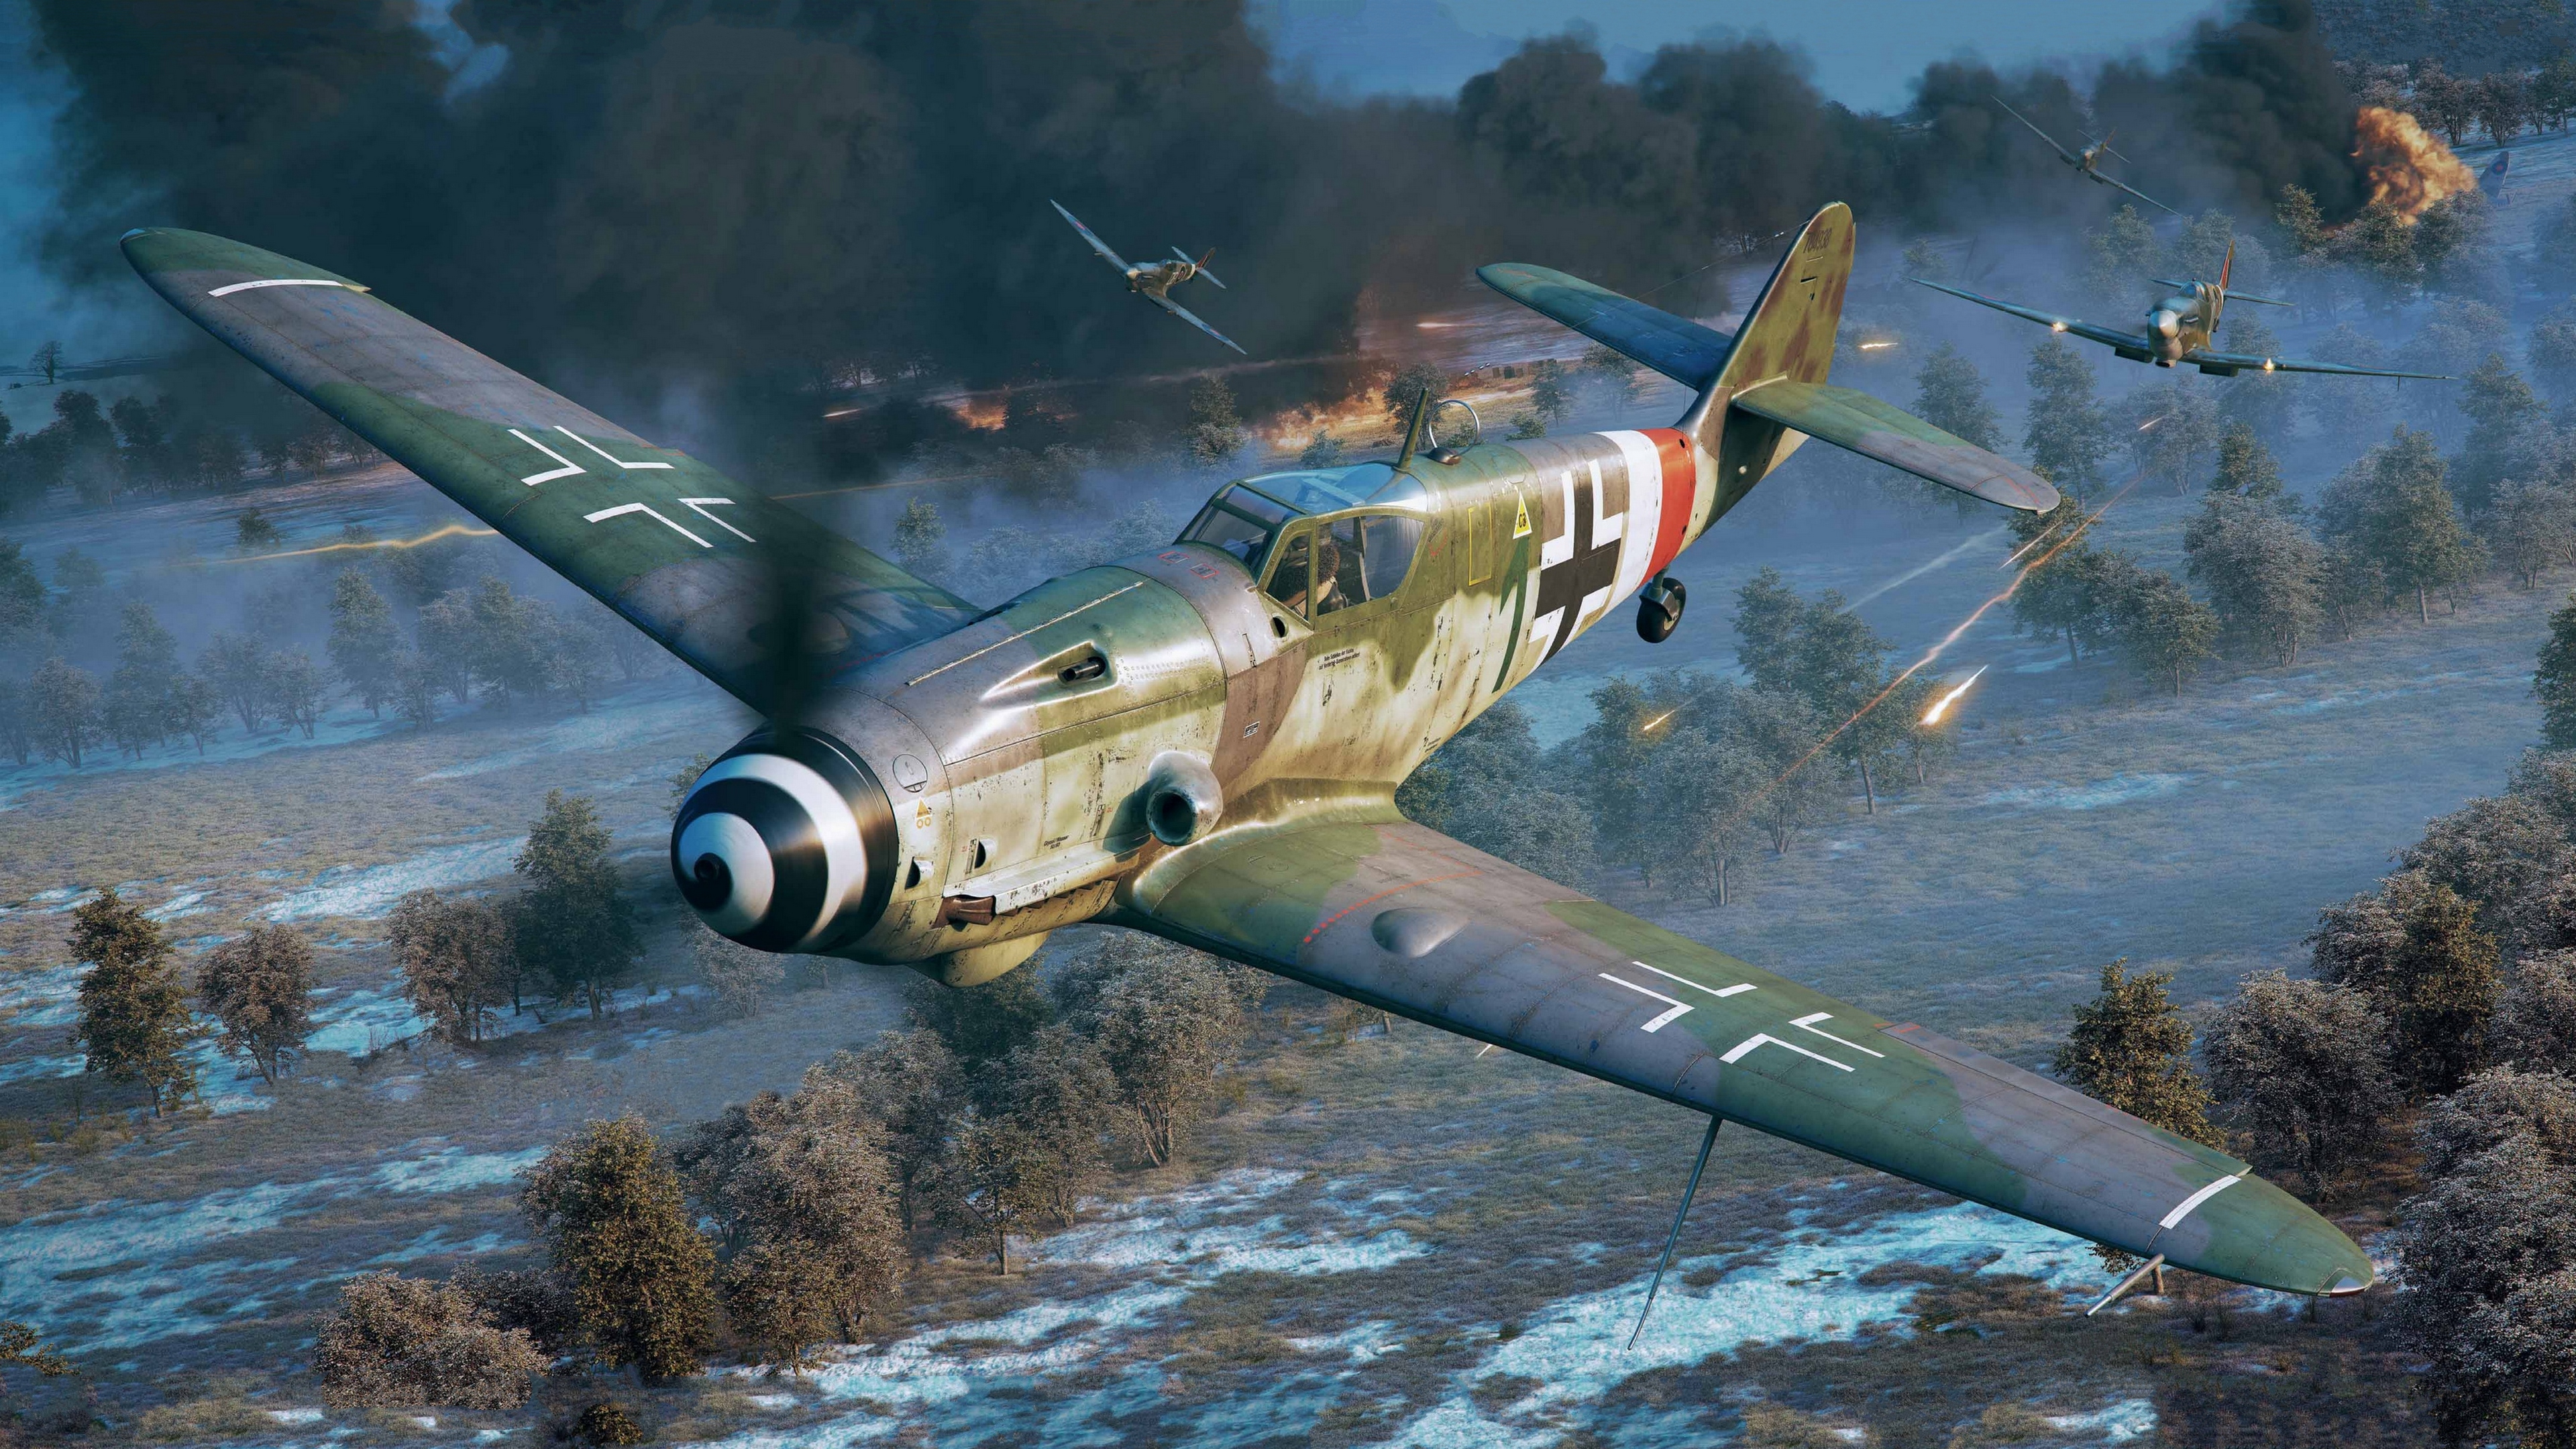 Free photo Battle of the fighters from the game War Thunder